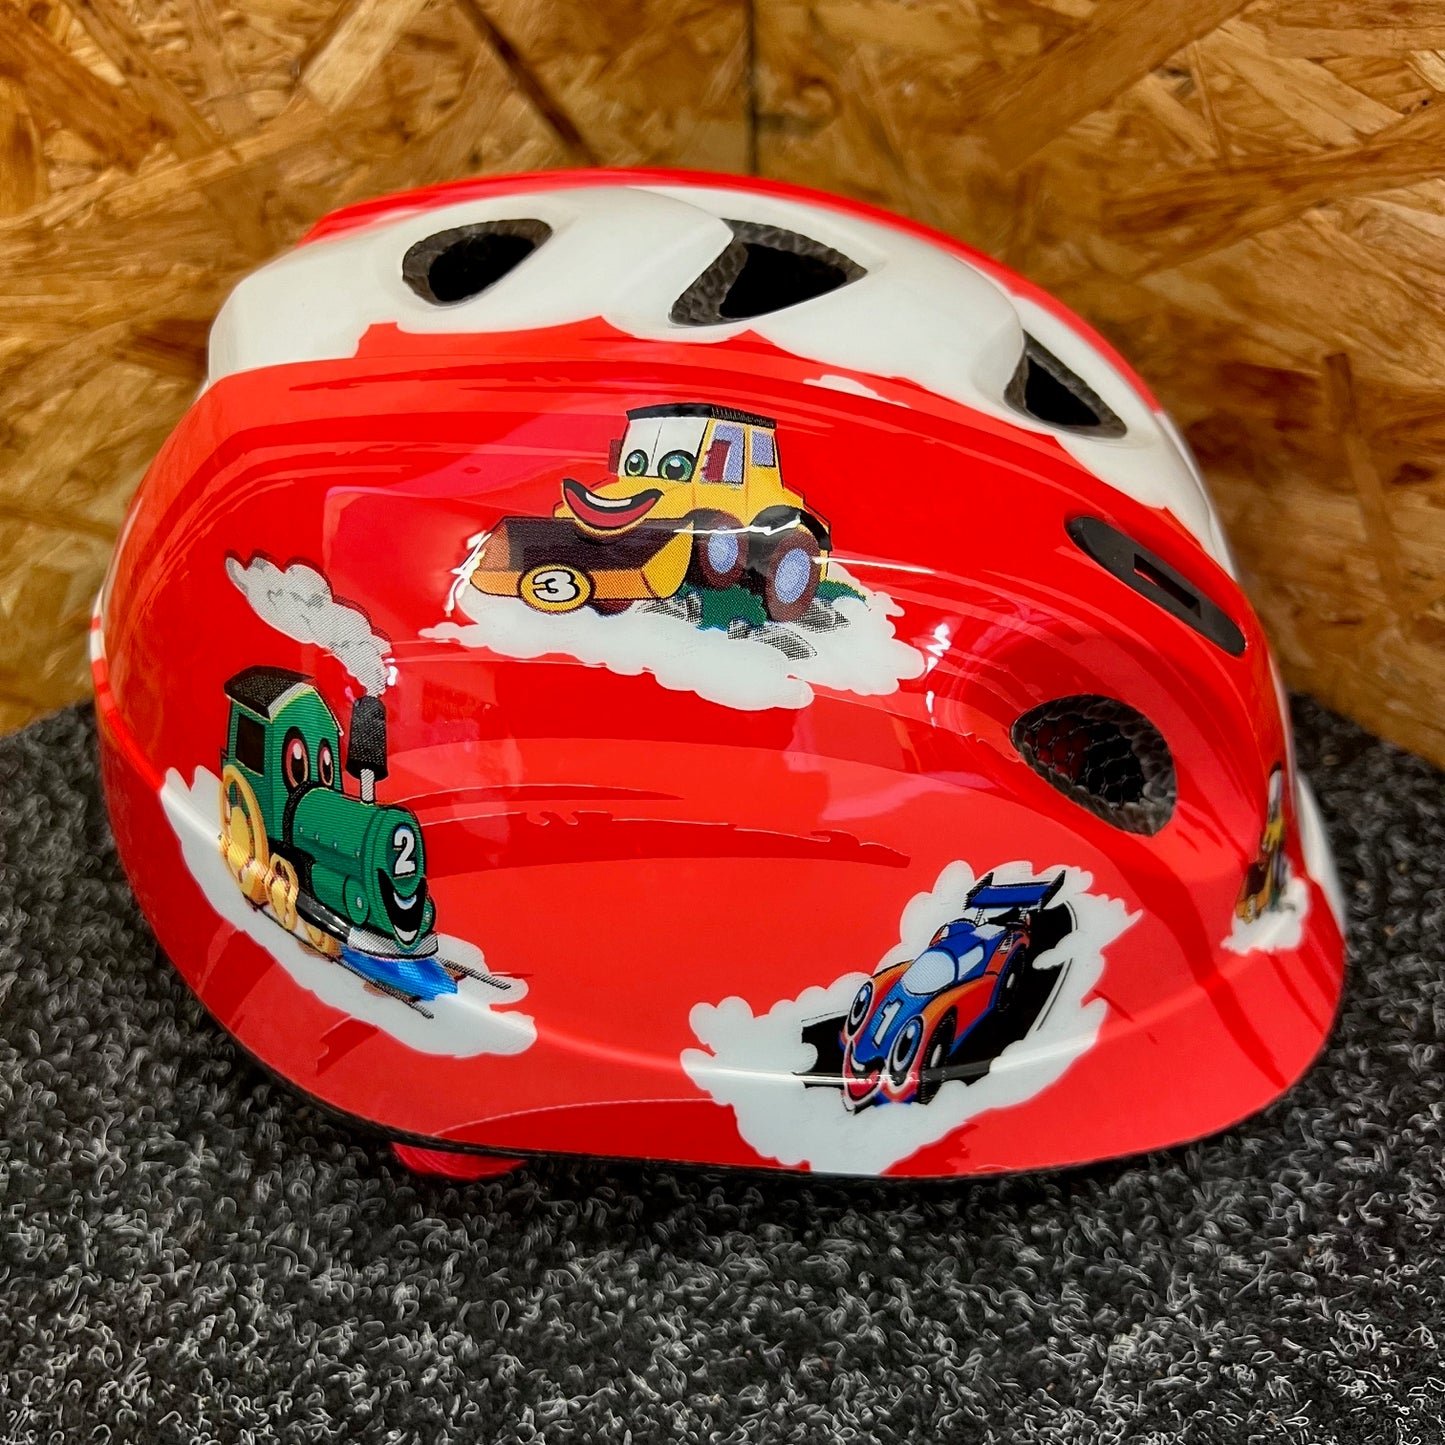 Apex Childrens Cycle Helmet, Red with Vehicles - Small - 46-52cm